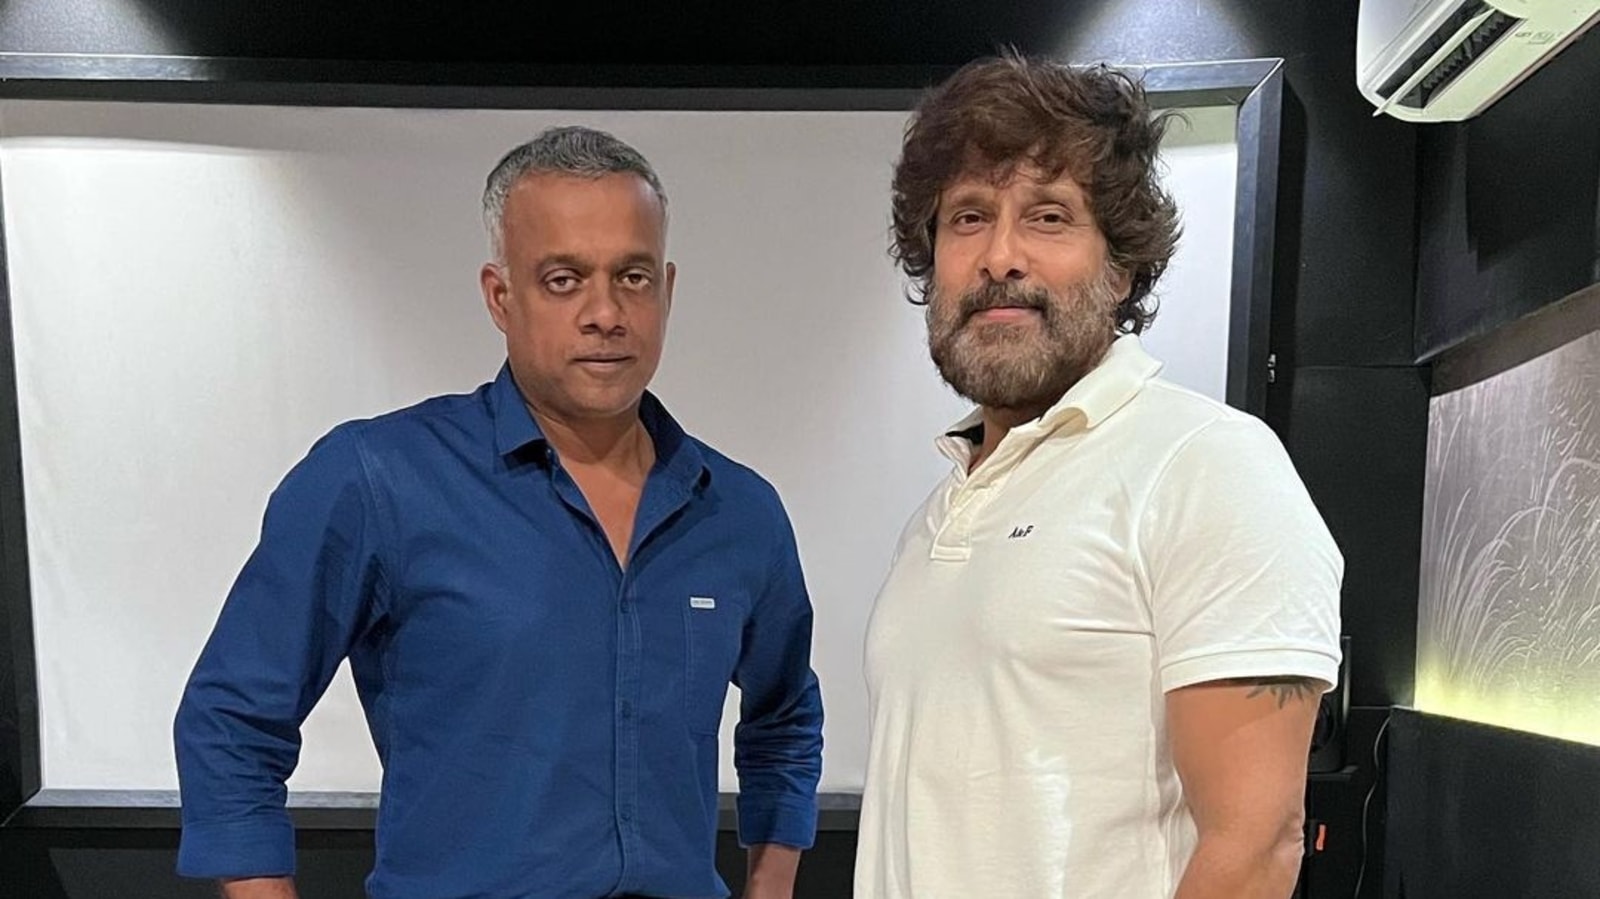 Vikram trends on Twitter after posing for picture with Gautham Menon. Here’s why